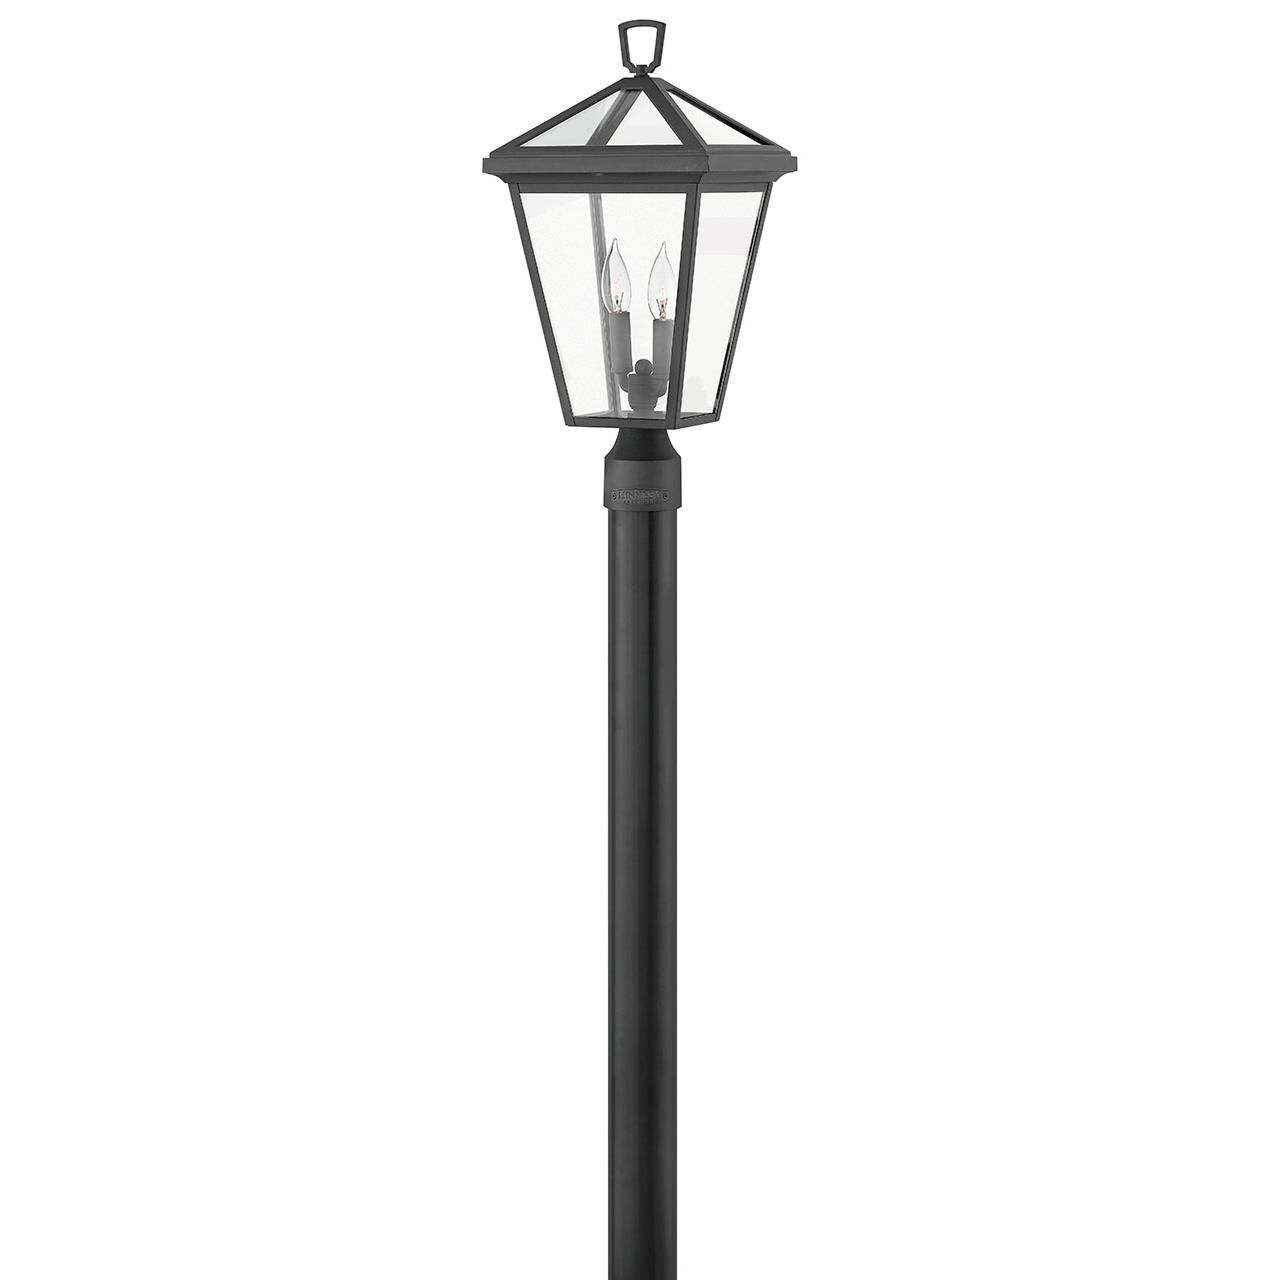 Photos - Floodlight / Street Light Hinkley Lighting Alford Place 20 Inch Tall 2 Light LED Outdoor Post Lamp A 